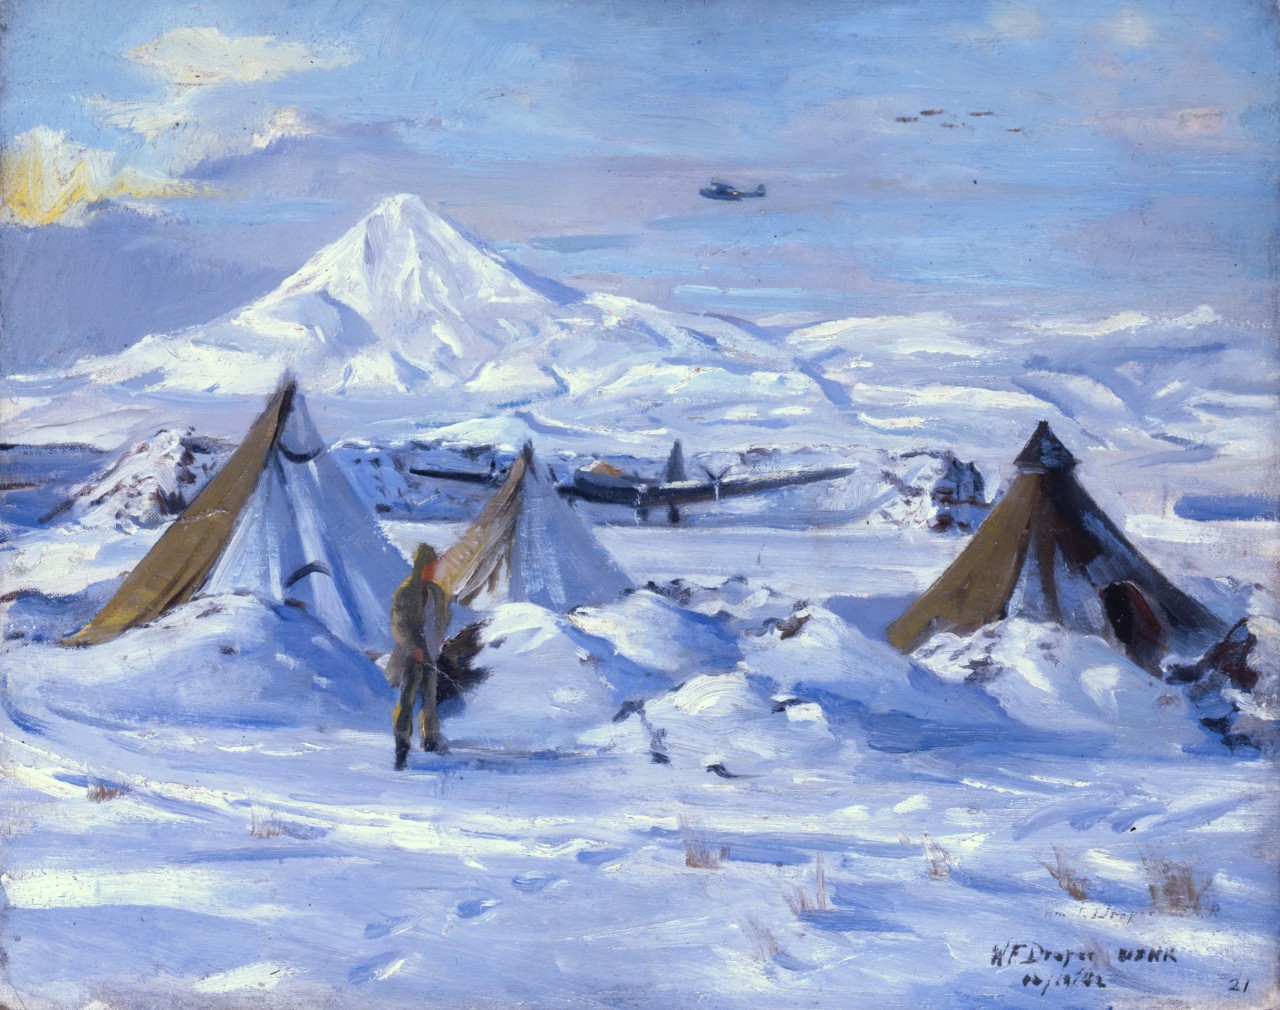 A man stands in front of three snow covered tents 